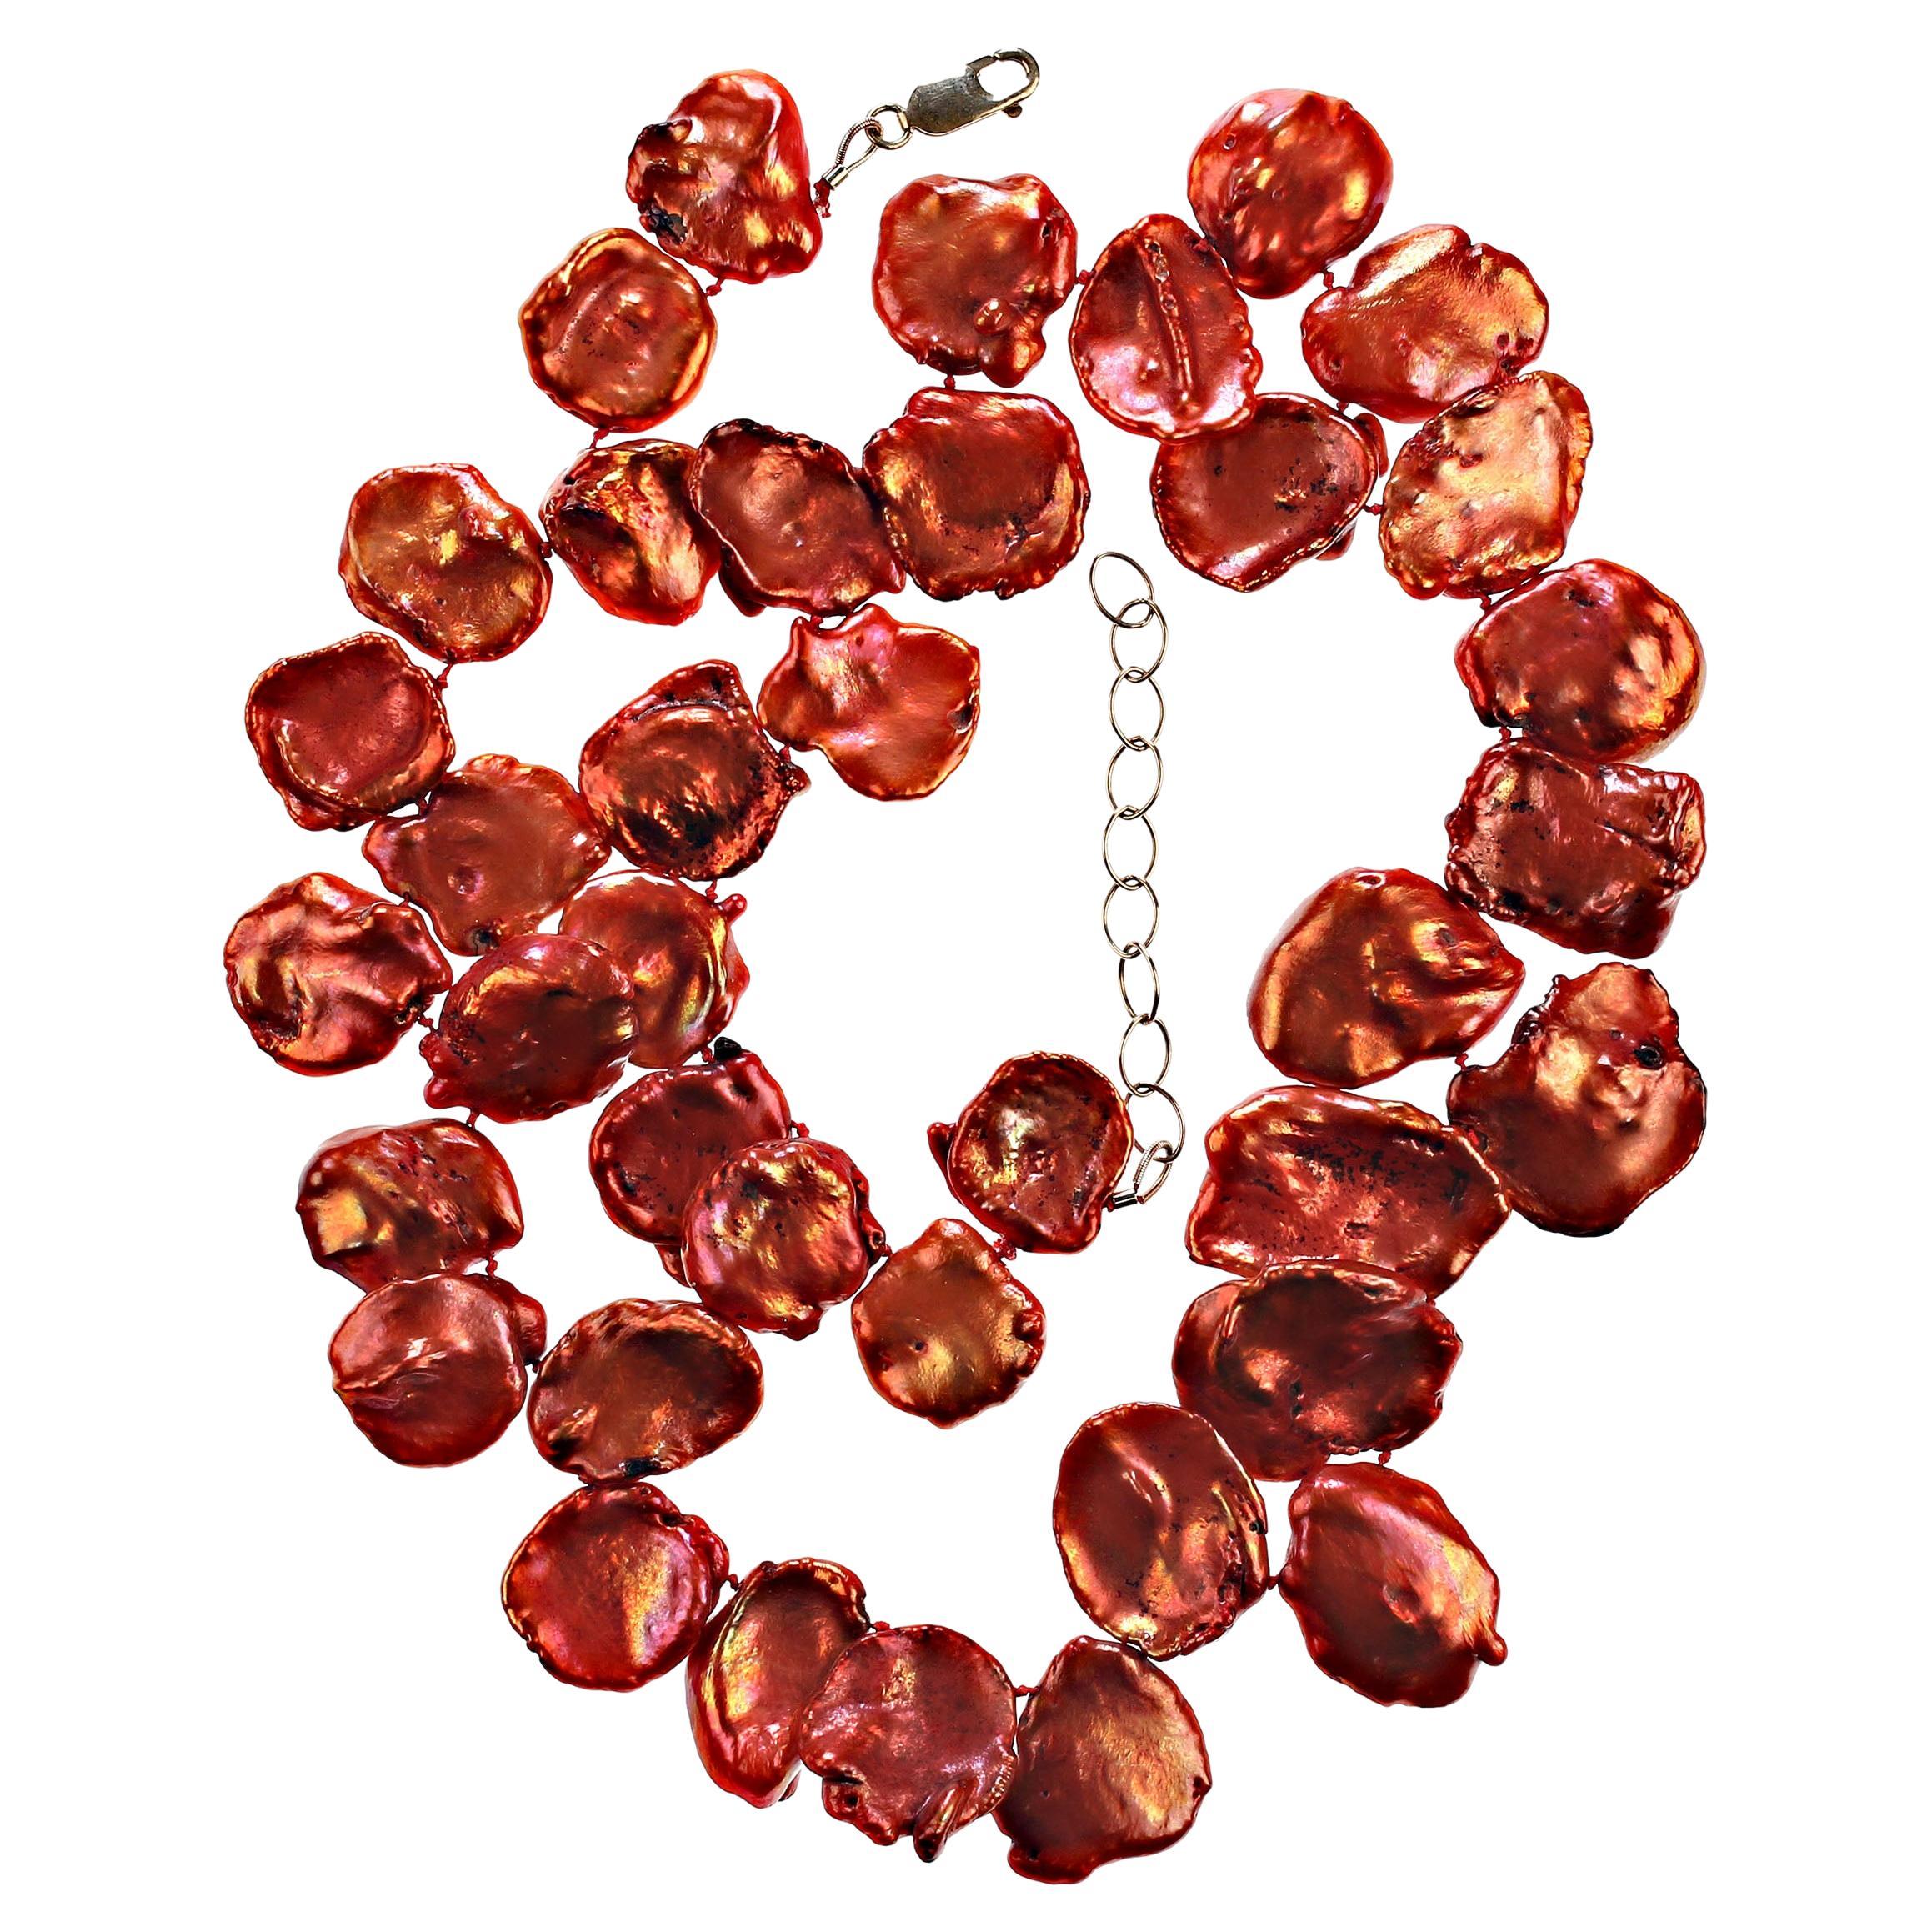 Graduated Flat Keshi Pearl necklace in lovely shades of burnished orange.  This unique hand knotted pearl necklace is 19 inches in length. The pearl colors range from orangey red to orange and purple. Pearl is the June birthstone, but don't wait